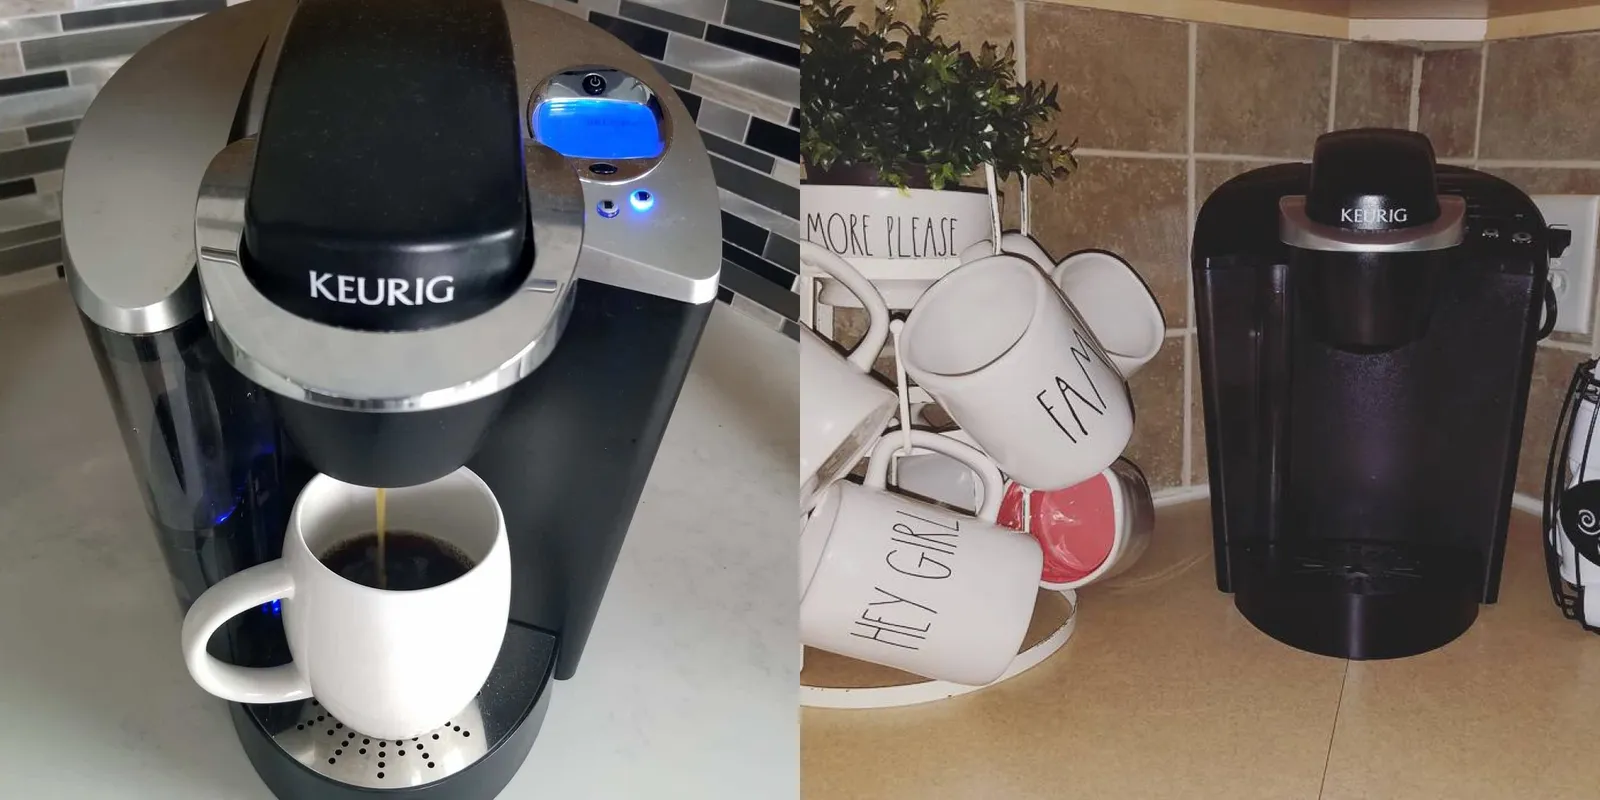 How To Turn Off Descale Light On Keurig